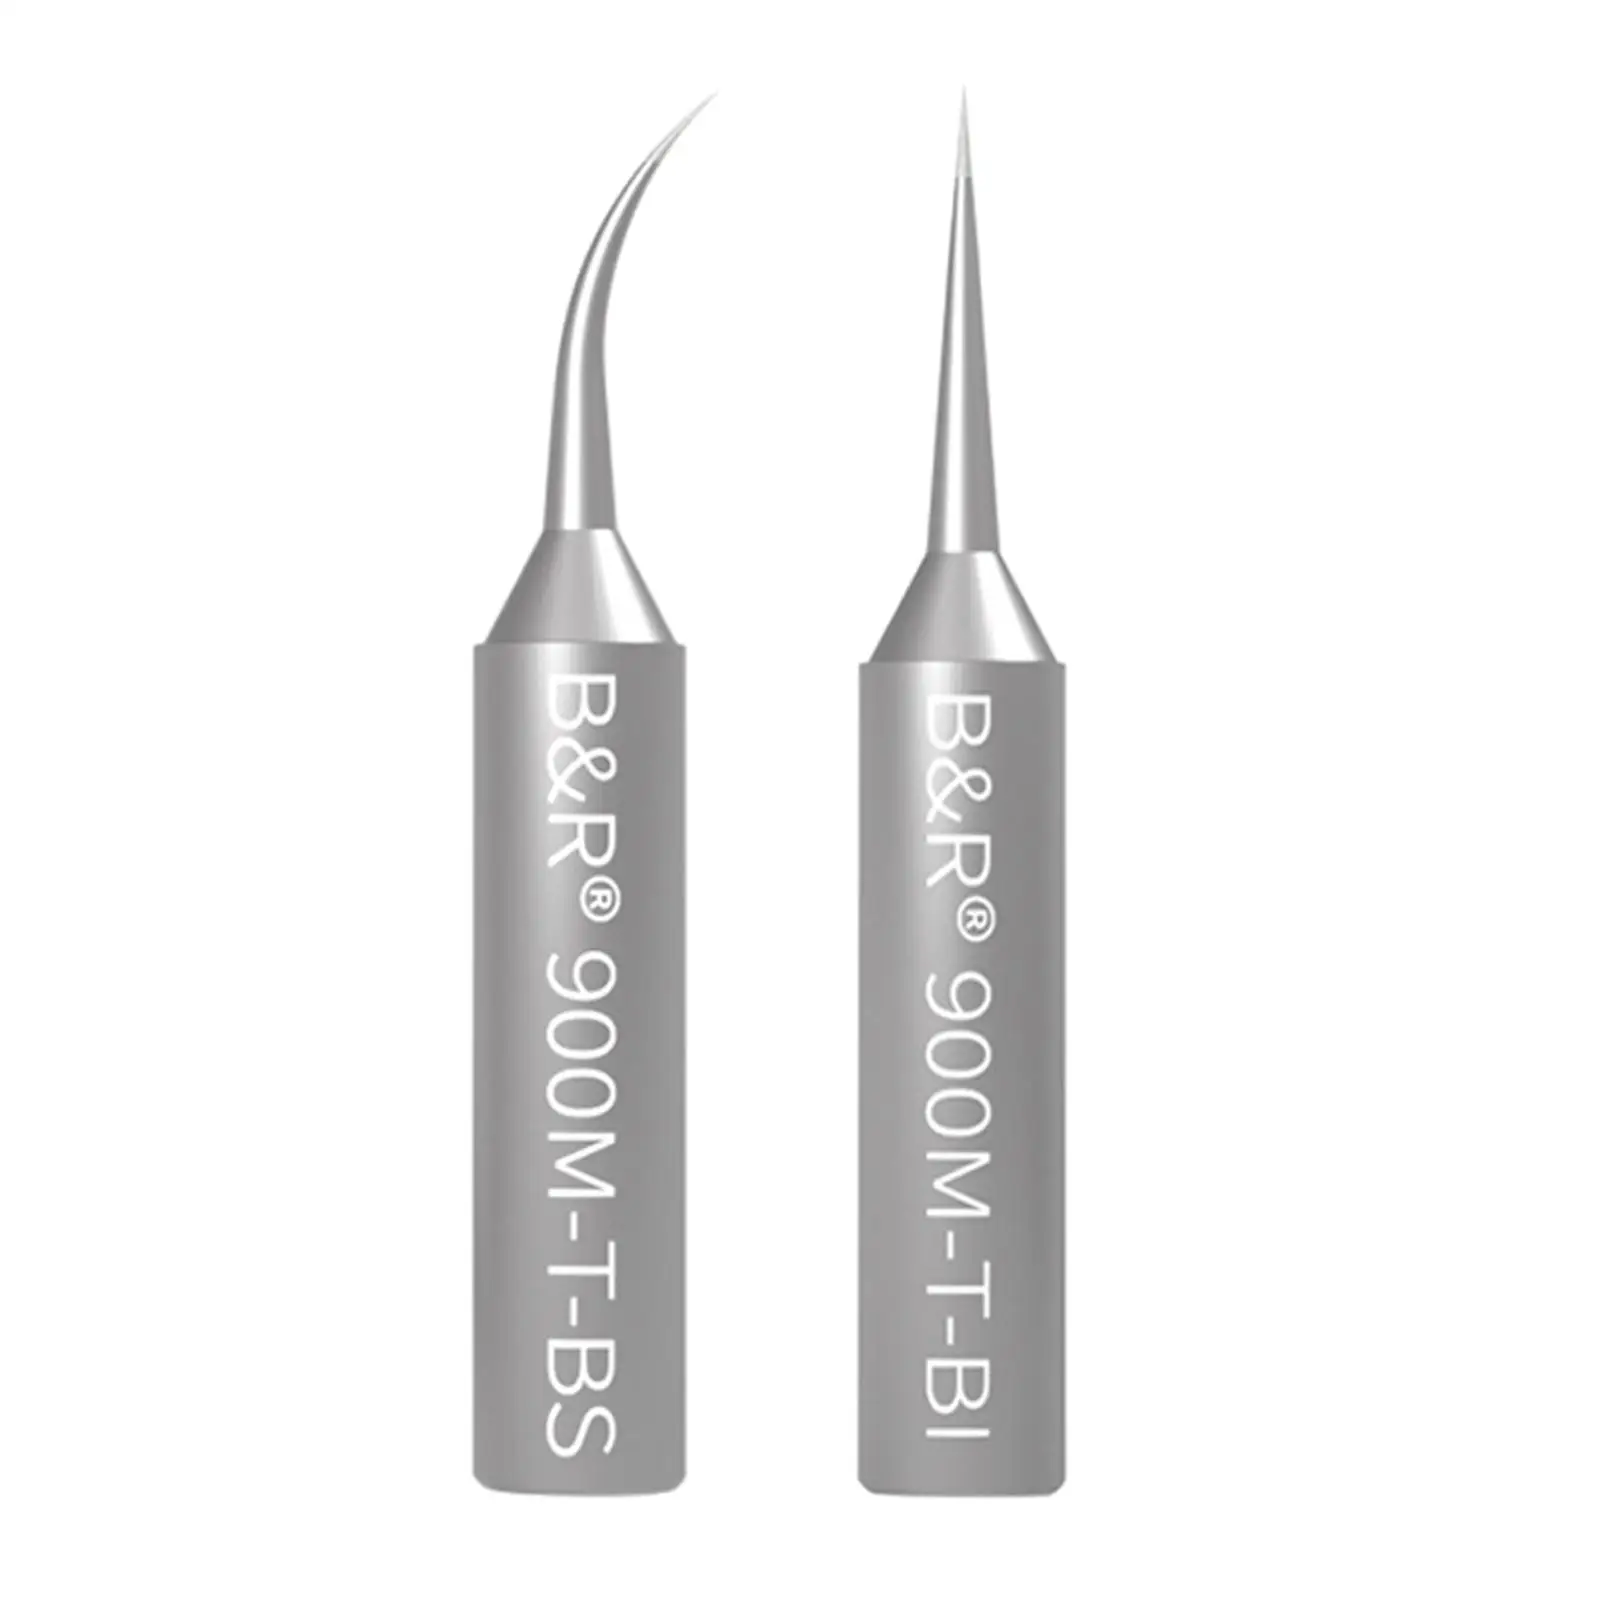 , Soldering Iron Tip, Replace , Soldering Head, Soldering Tips, for 900M-T-Bs